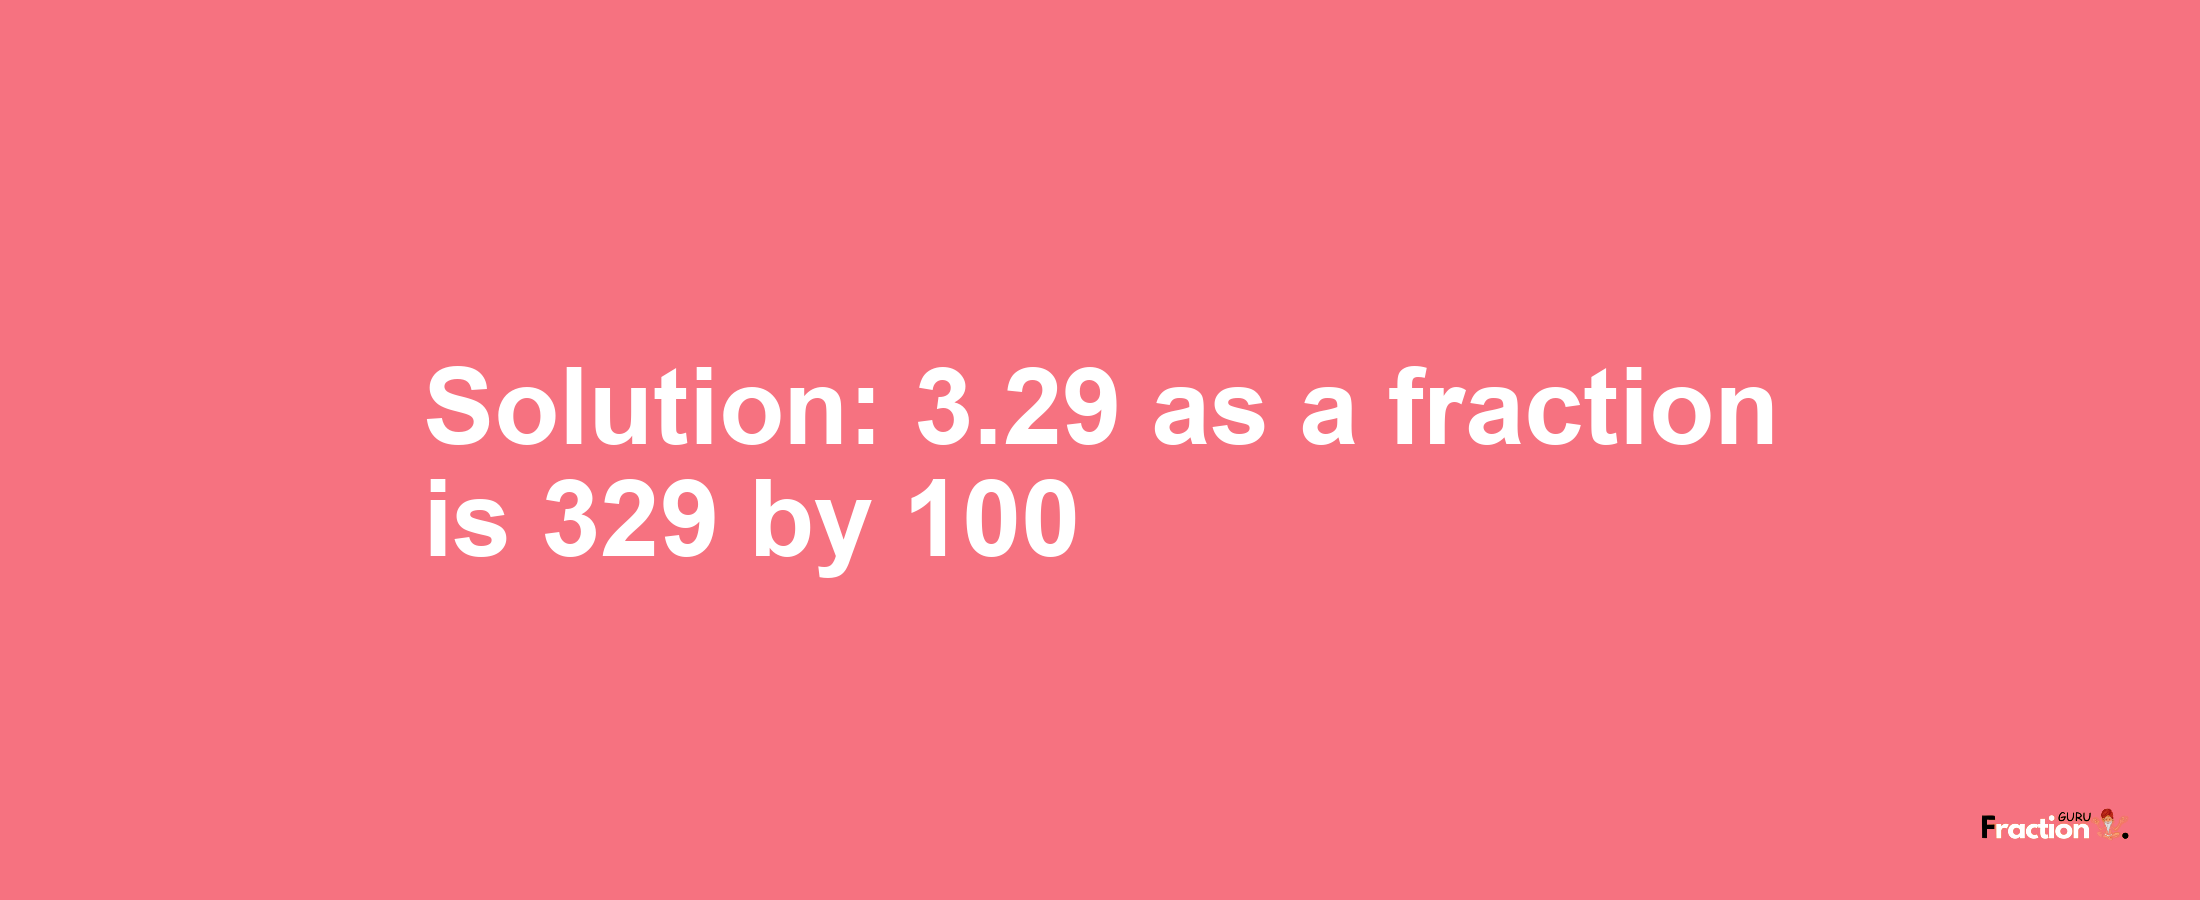 Solution:3.29 as a fraction is 329/100